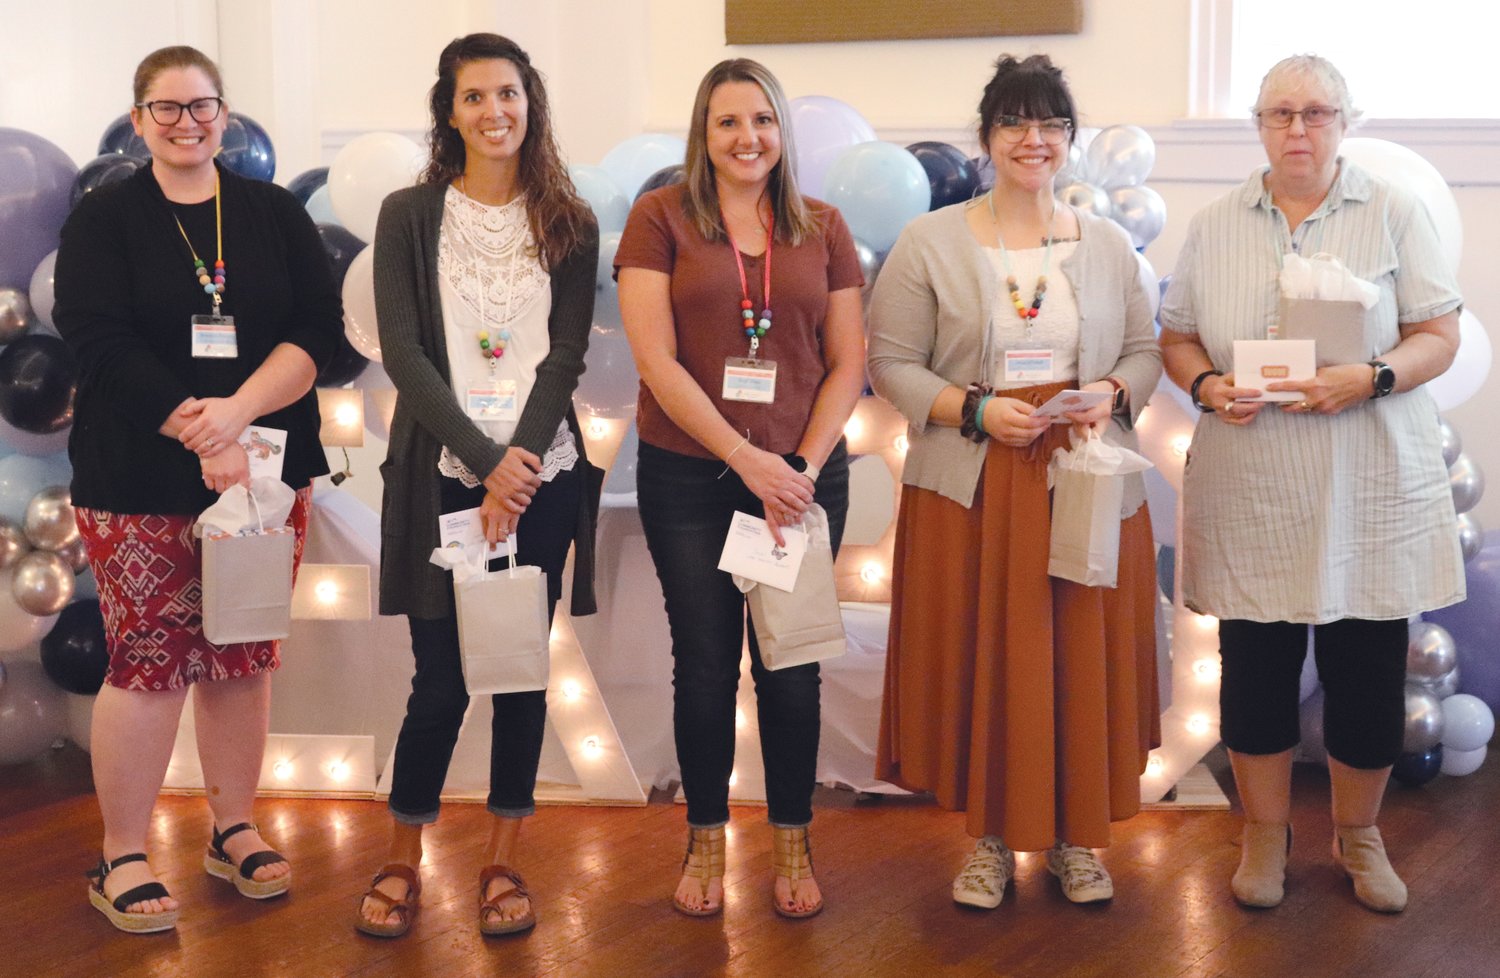 These individuals recently completed their Child Development Associate’s credentials and were recognized at the Expo. 
They are, from left, Brianna Powers, Jessica Dowell, Shari Shaw, Jessica Pursell and Deb Northcutt. Not pictured is Kelsey Wood.